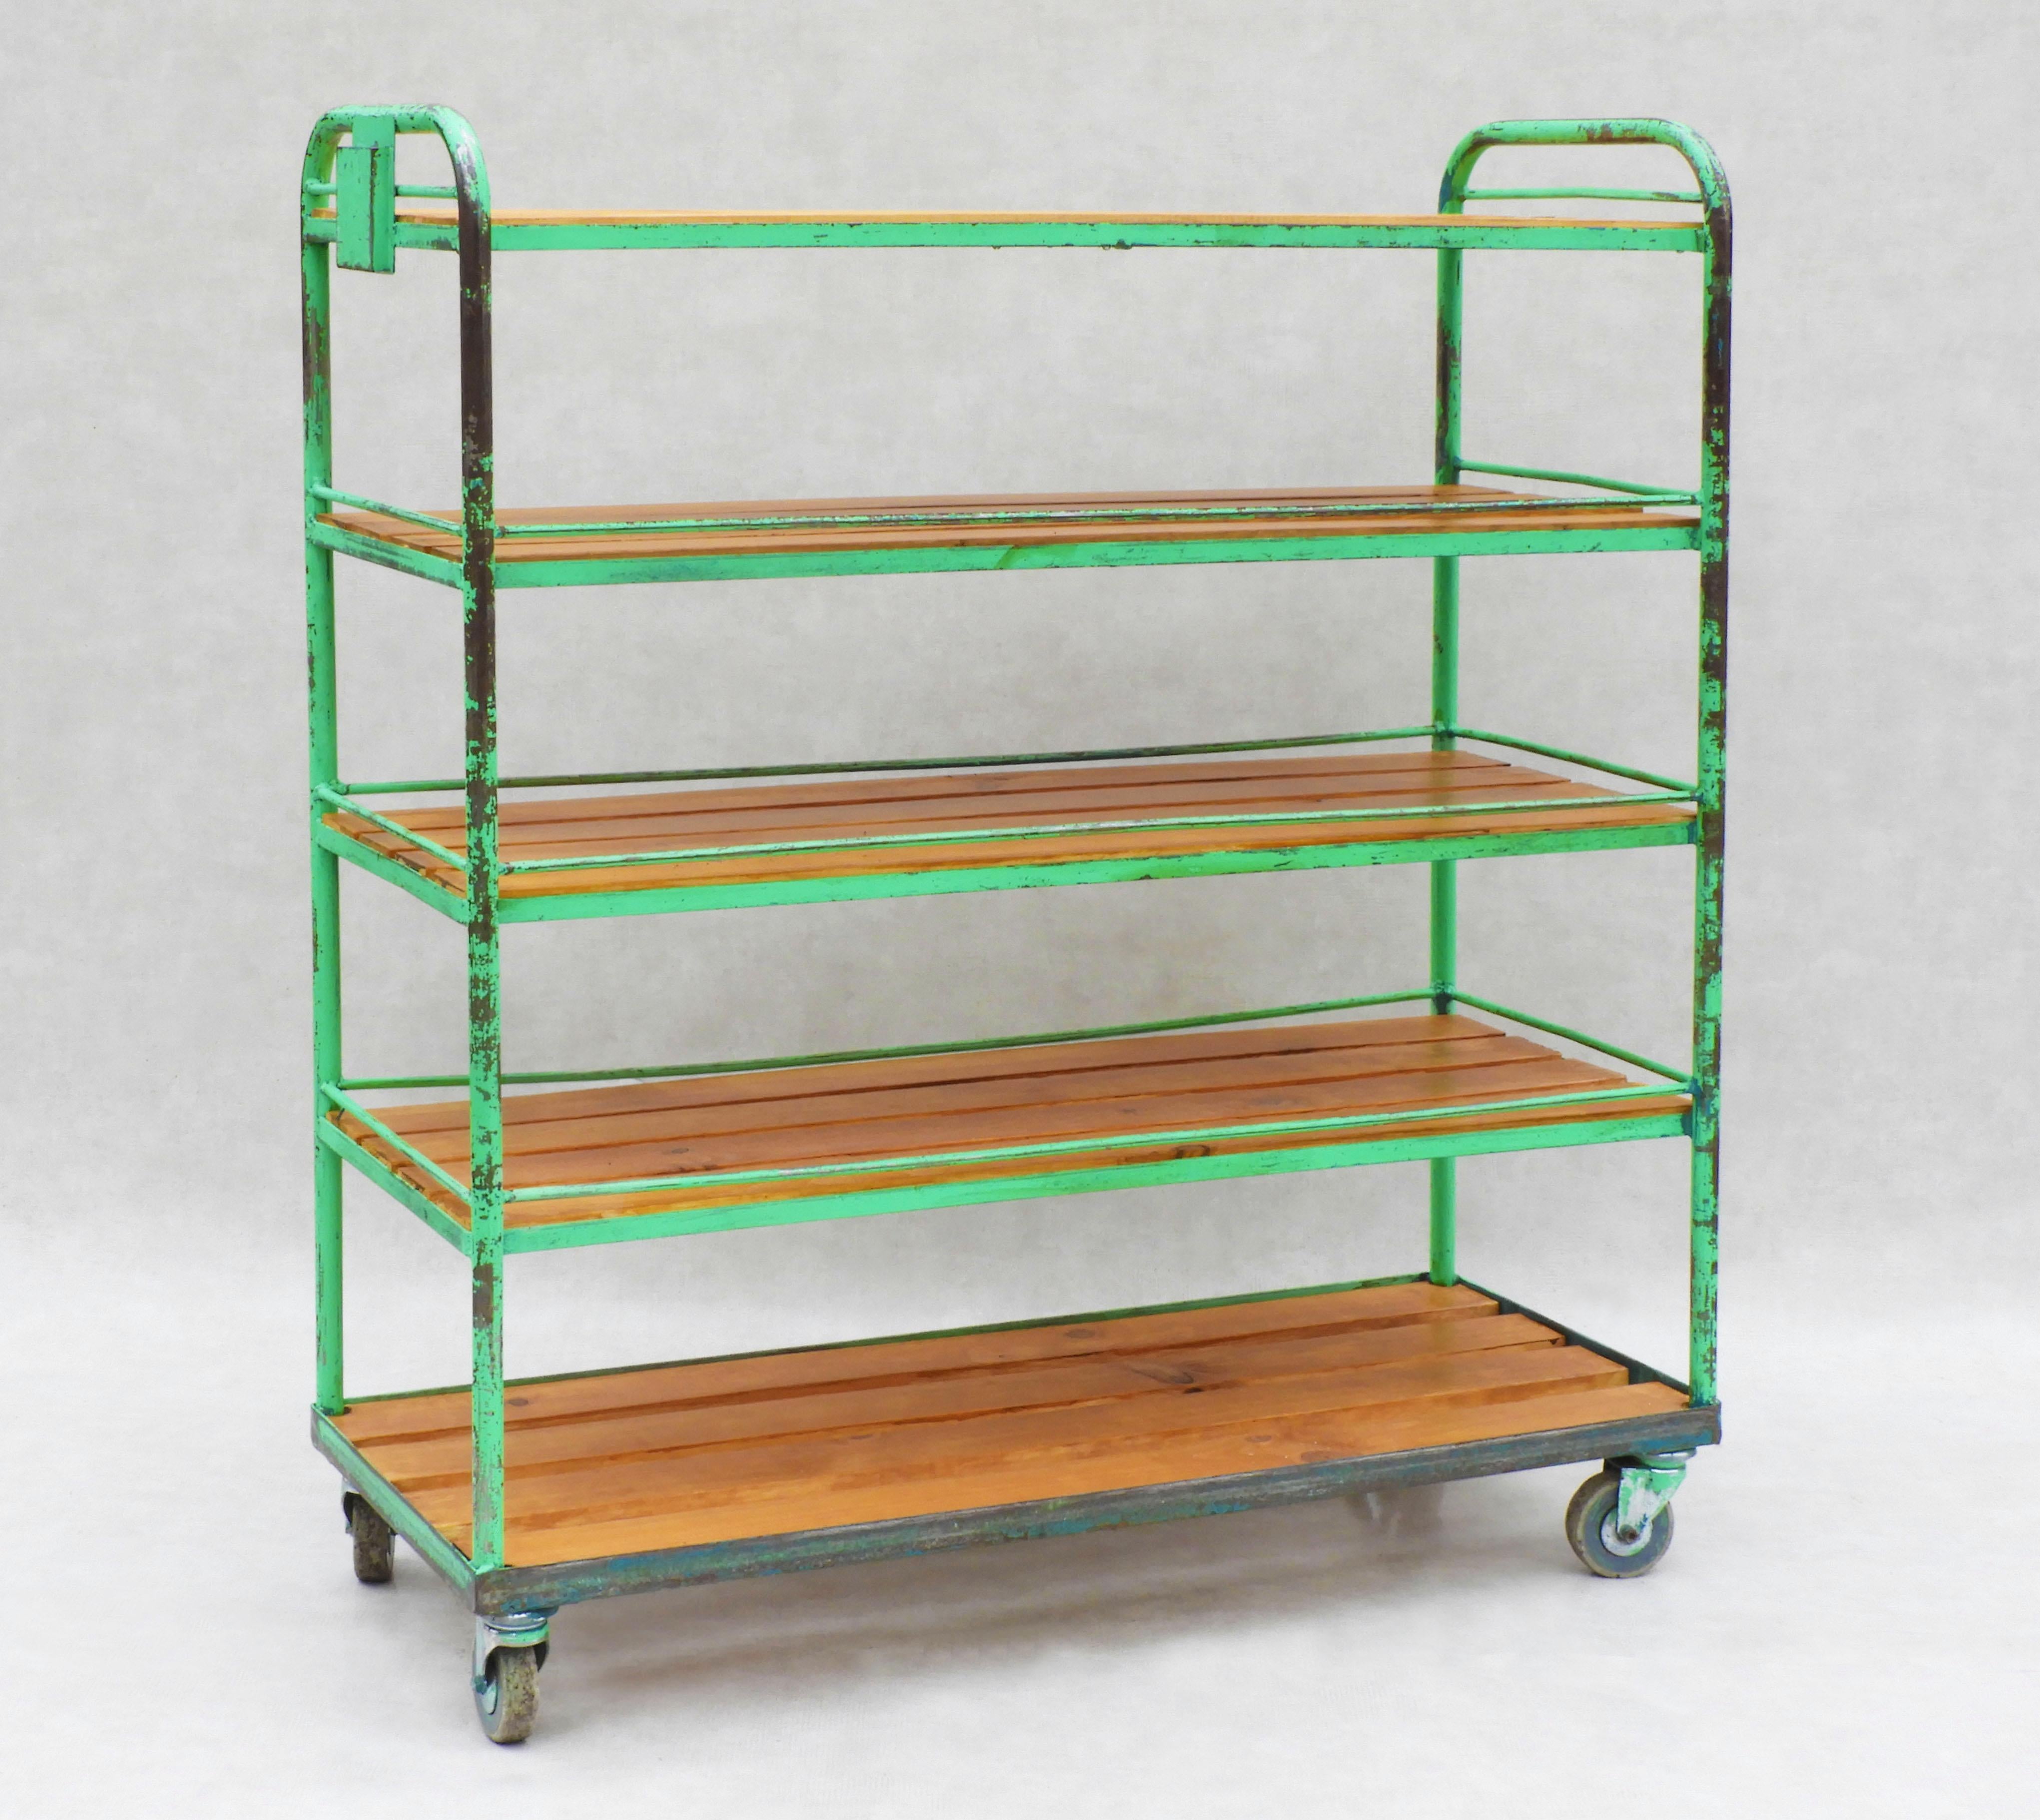 Large Mid century industrial shelving rack on casters.
Five pine slatted shelves on a tubular metal frame with zippy green distressed paintwork on multidirectional wheels.
A fun industrial look perfect for loft design, room divider, kitchen storage